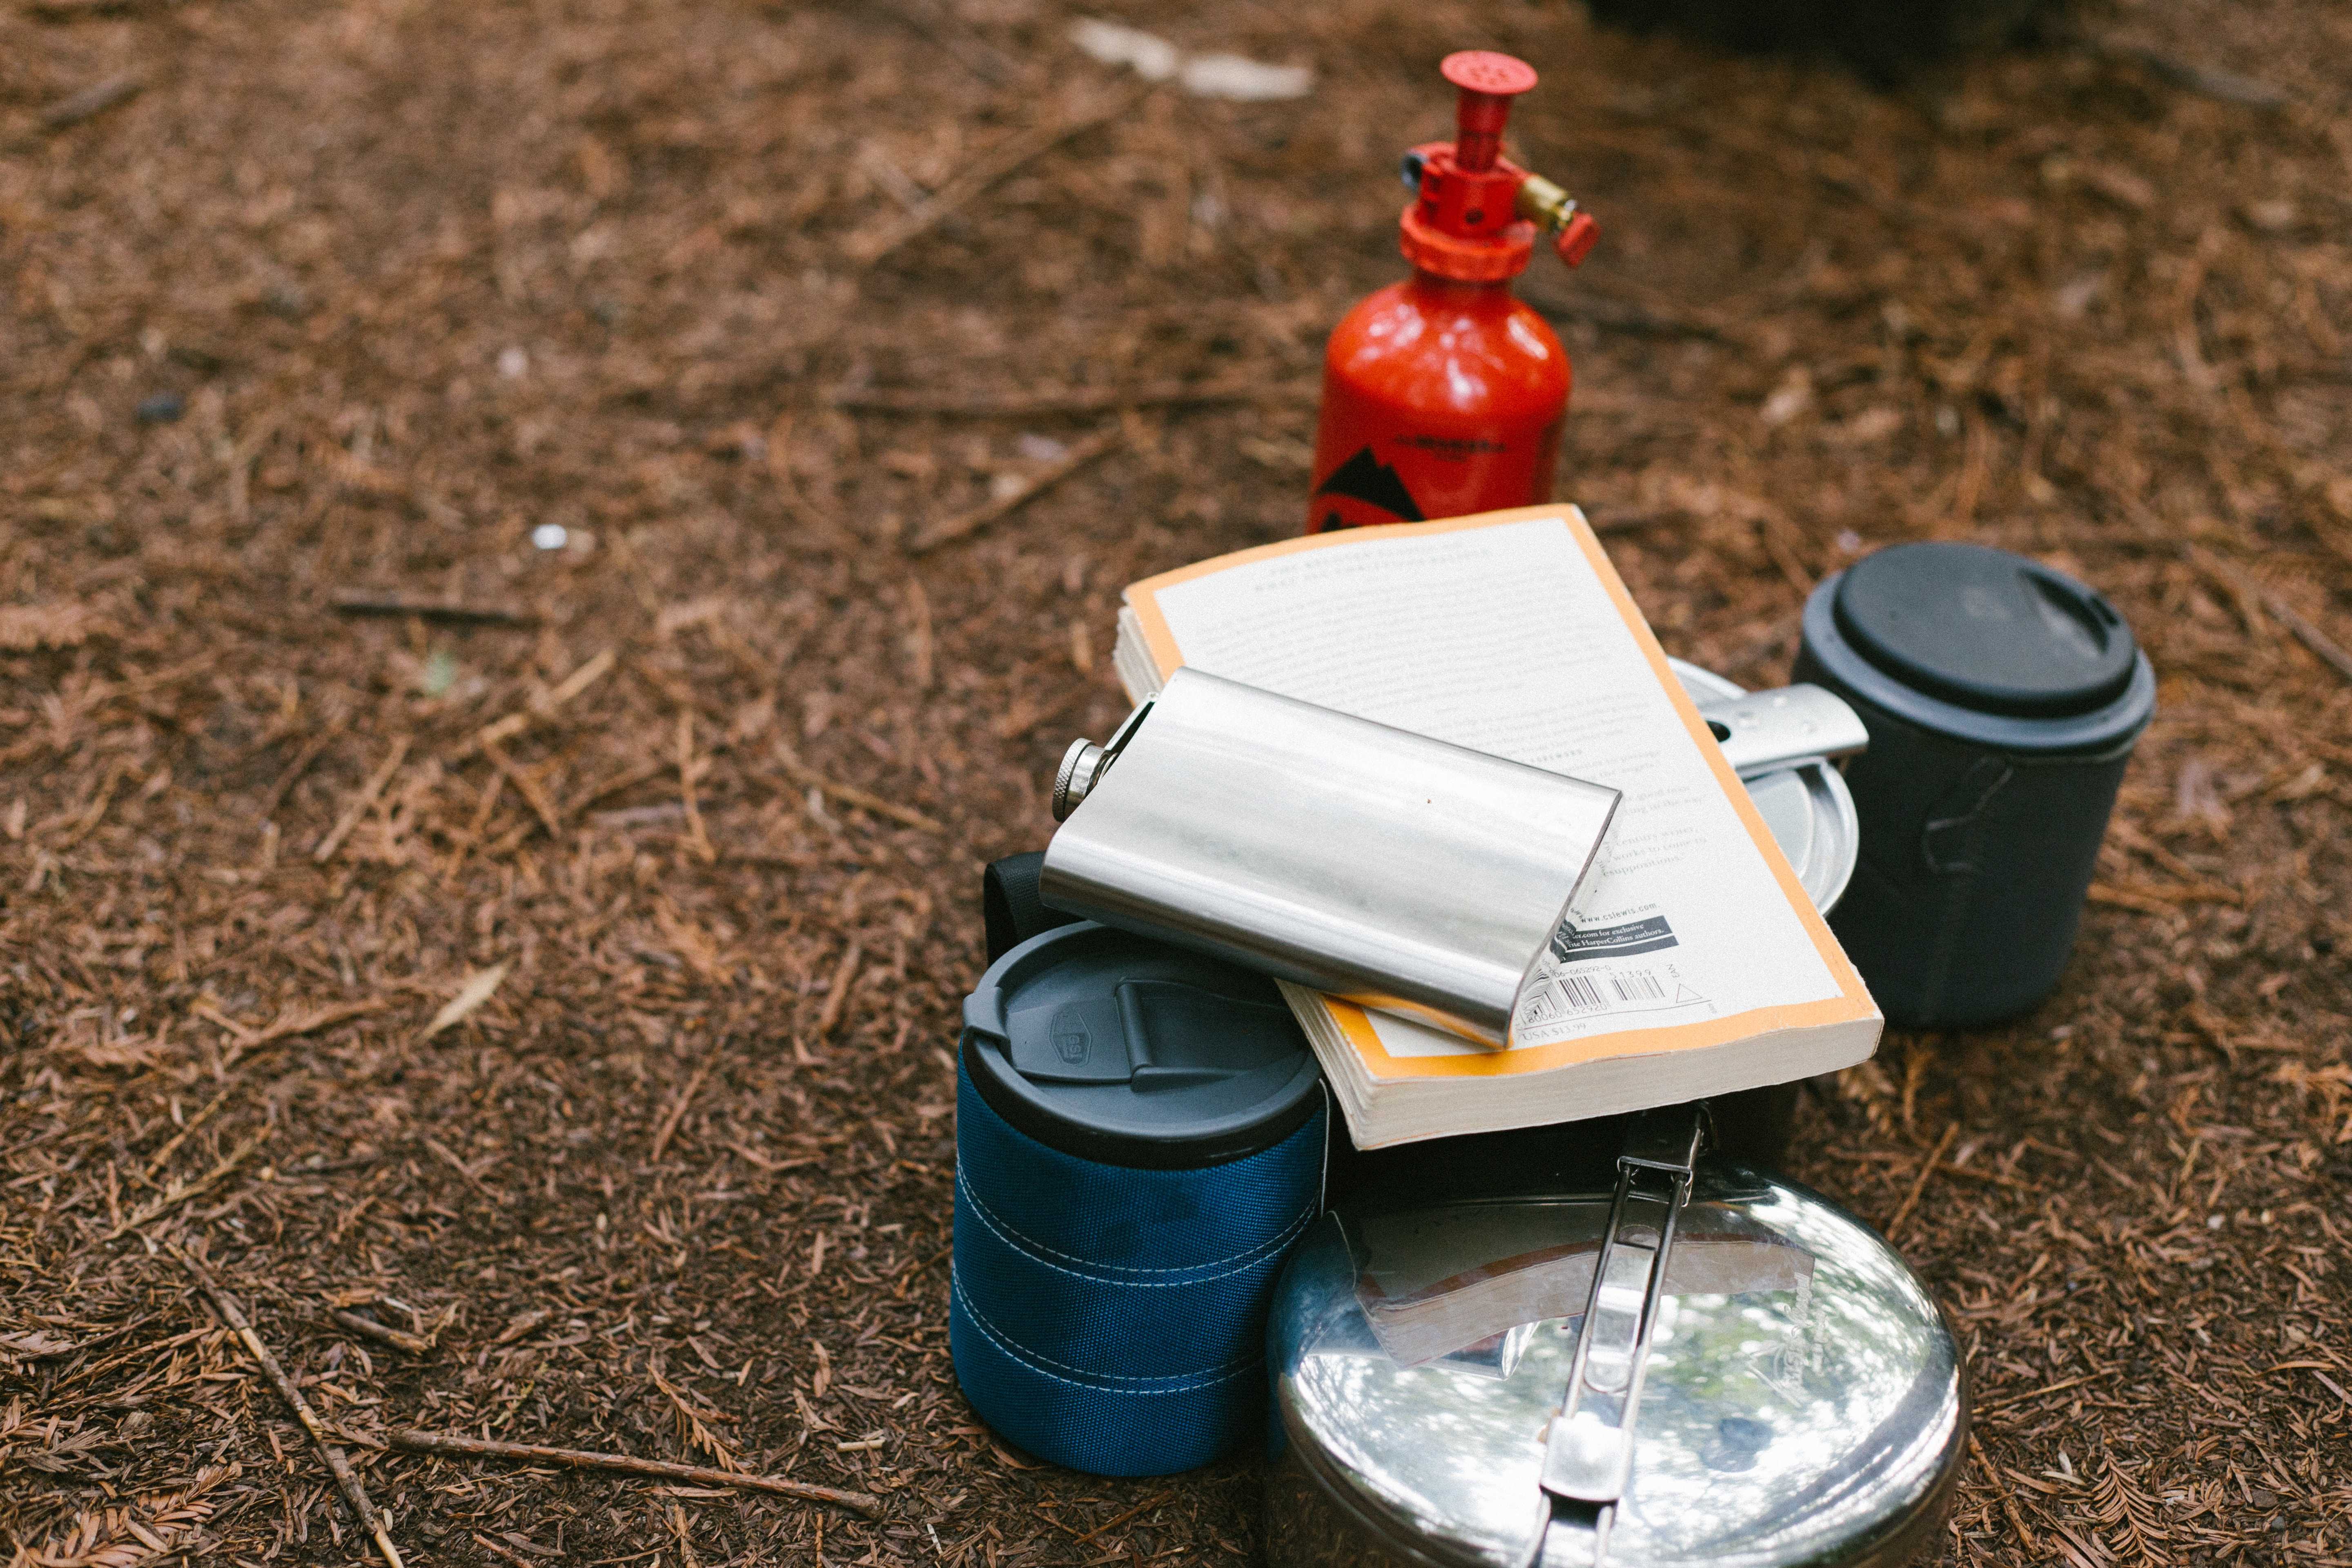 Some well-chosen essentials can make camping life more comfortable (photo: Kyle Glenn/Unsplash)